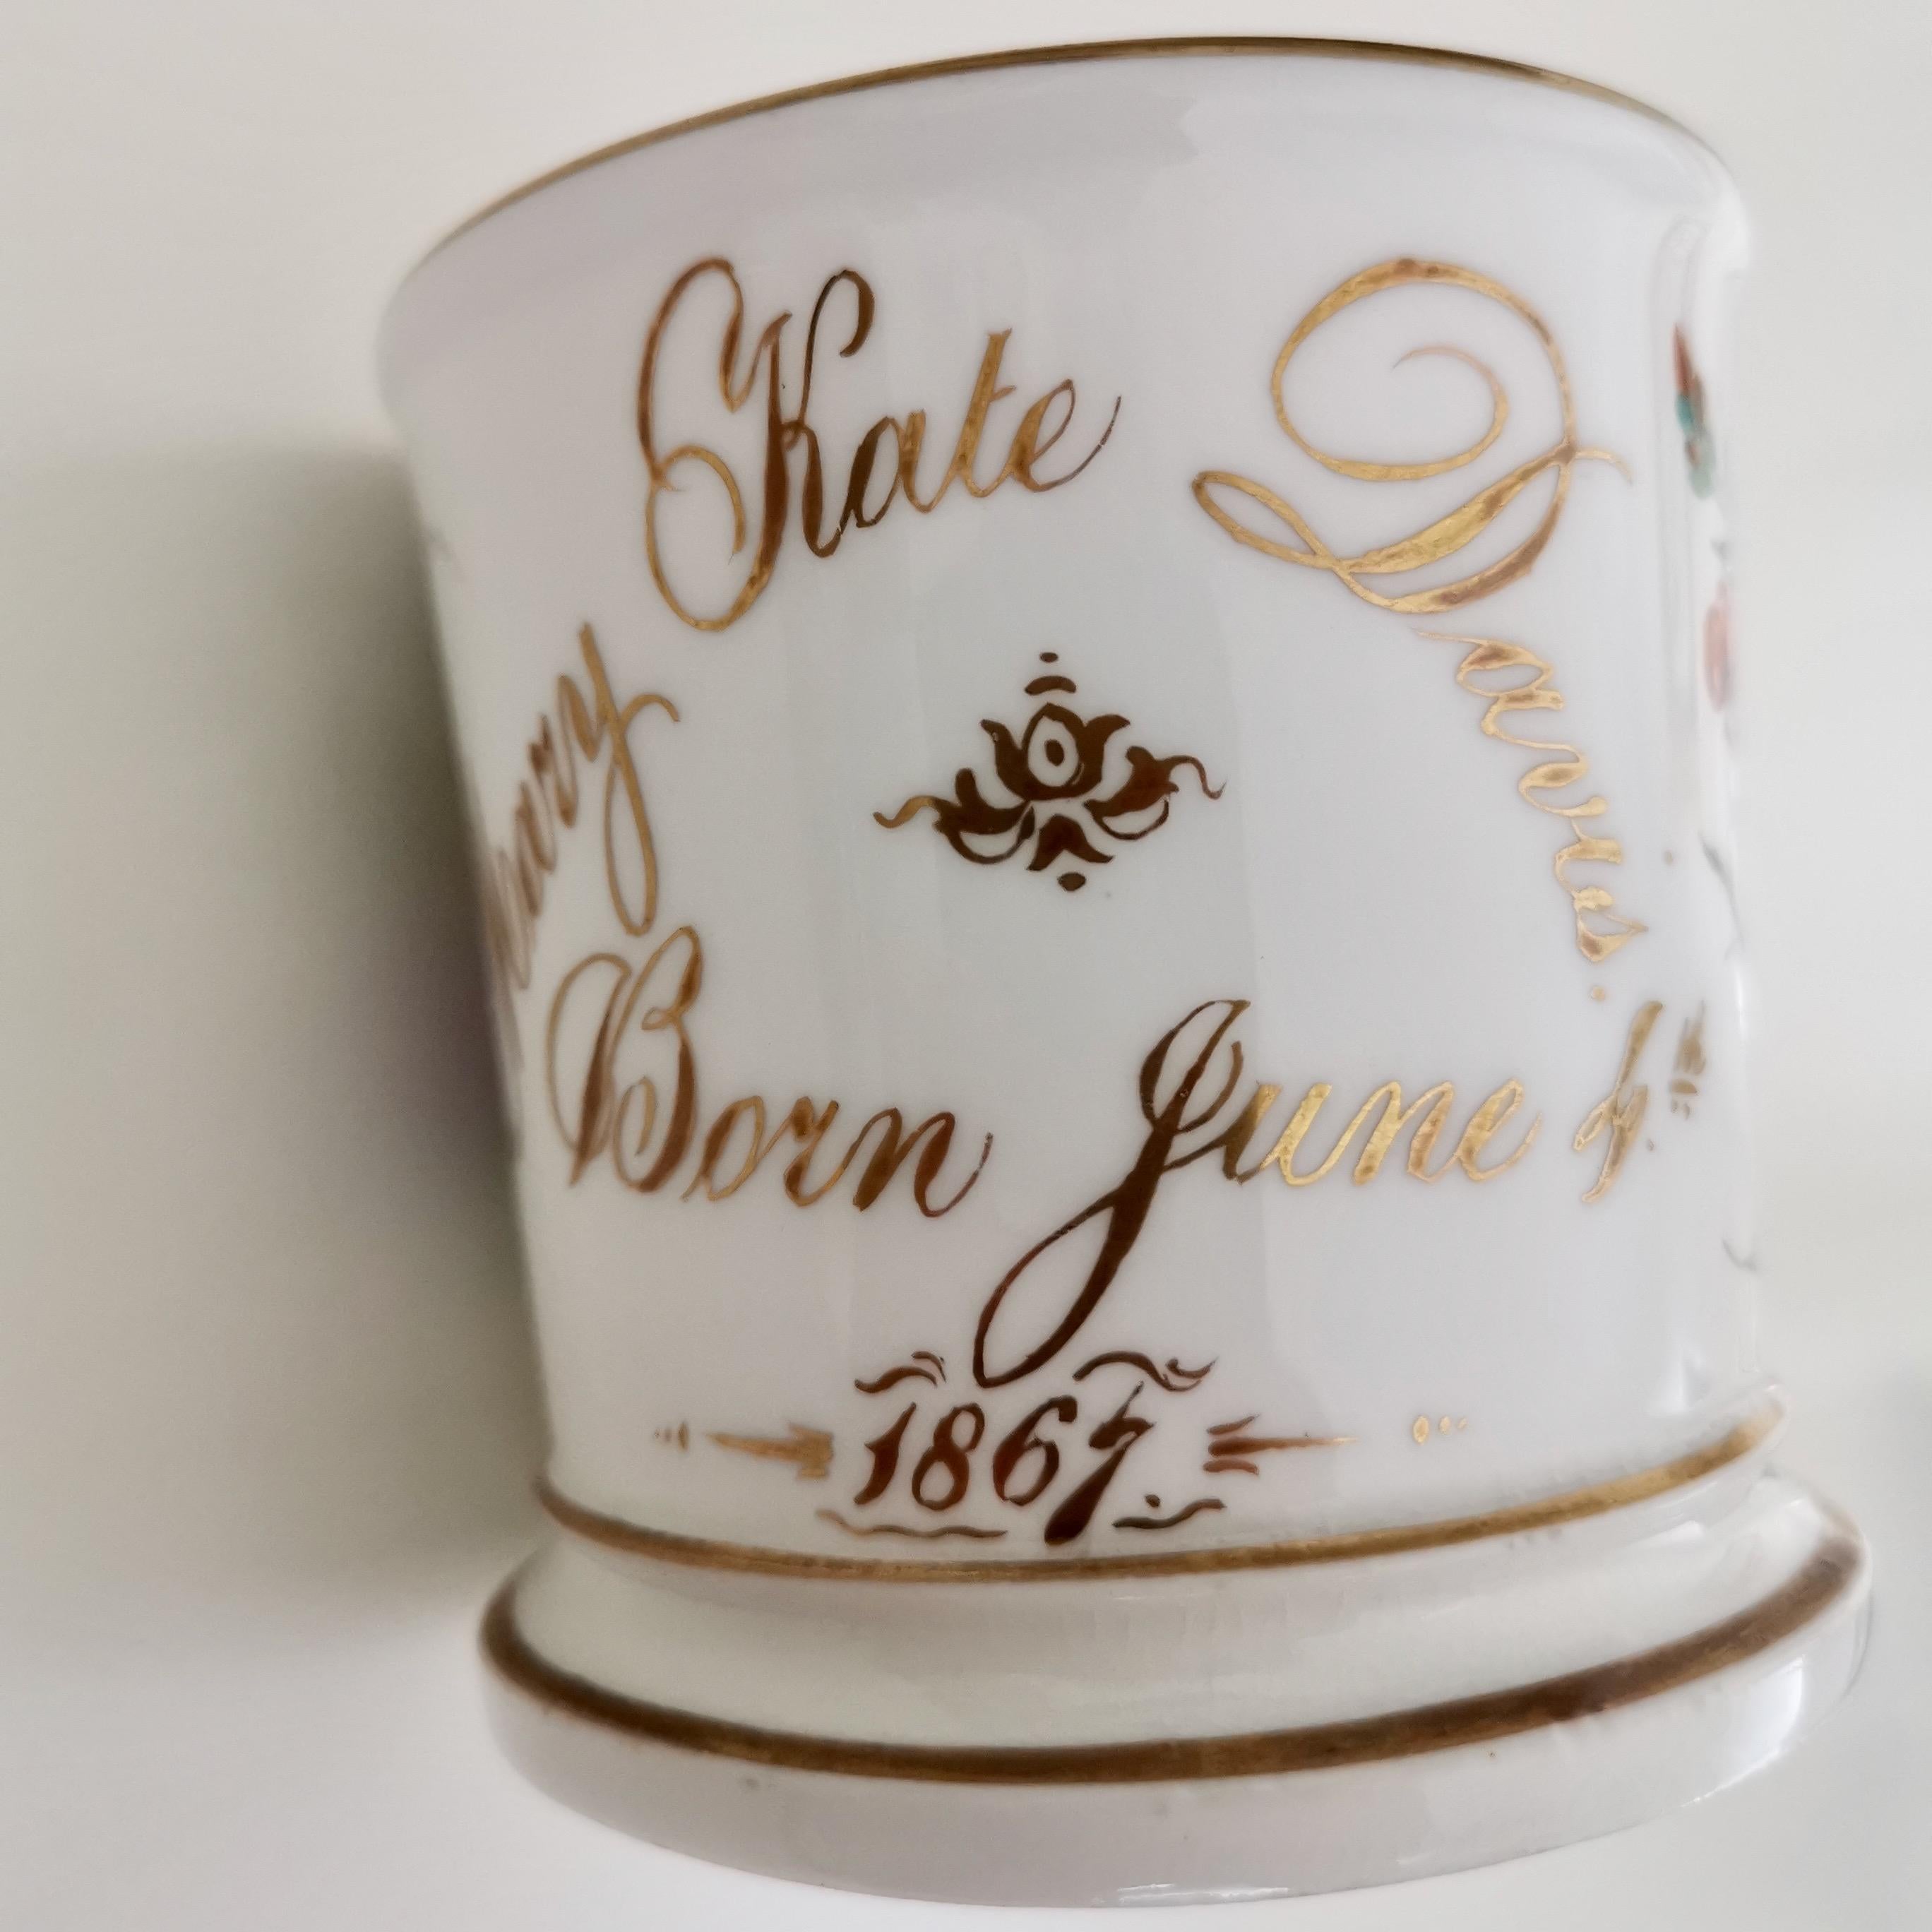 Mid-19th Century Staffordshire Porcelain Christening Mug, White with Flowers, Victorian, 1867